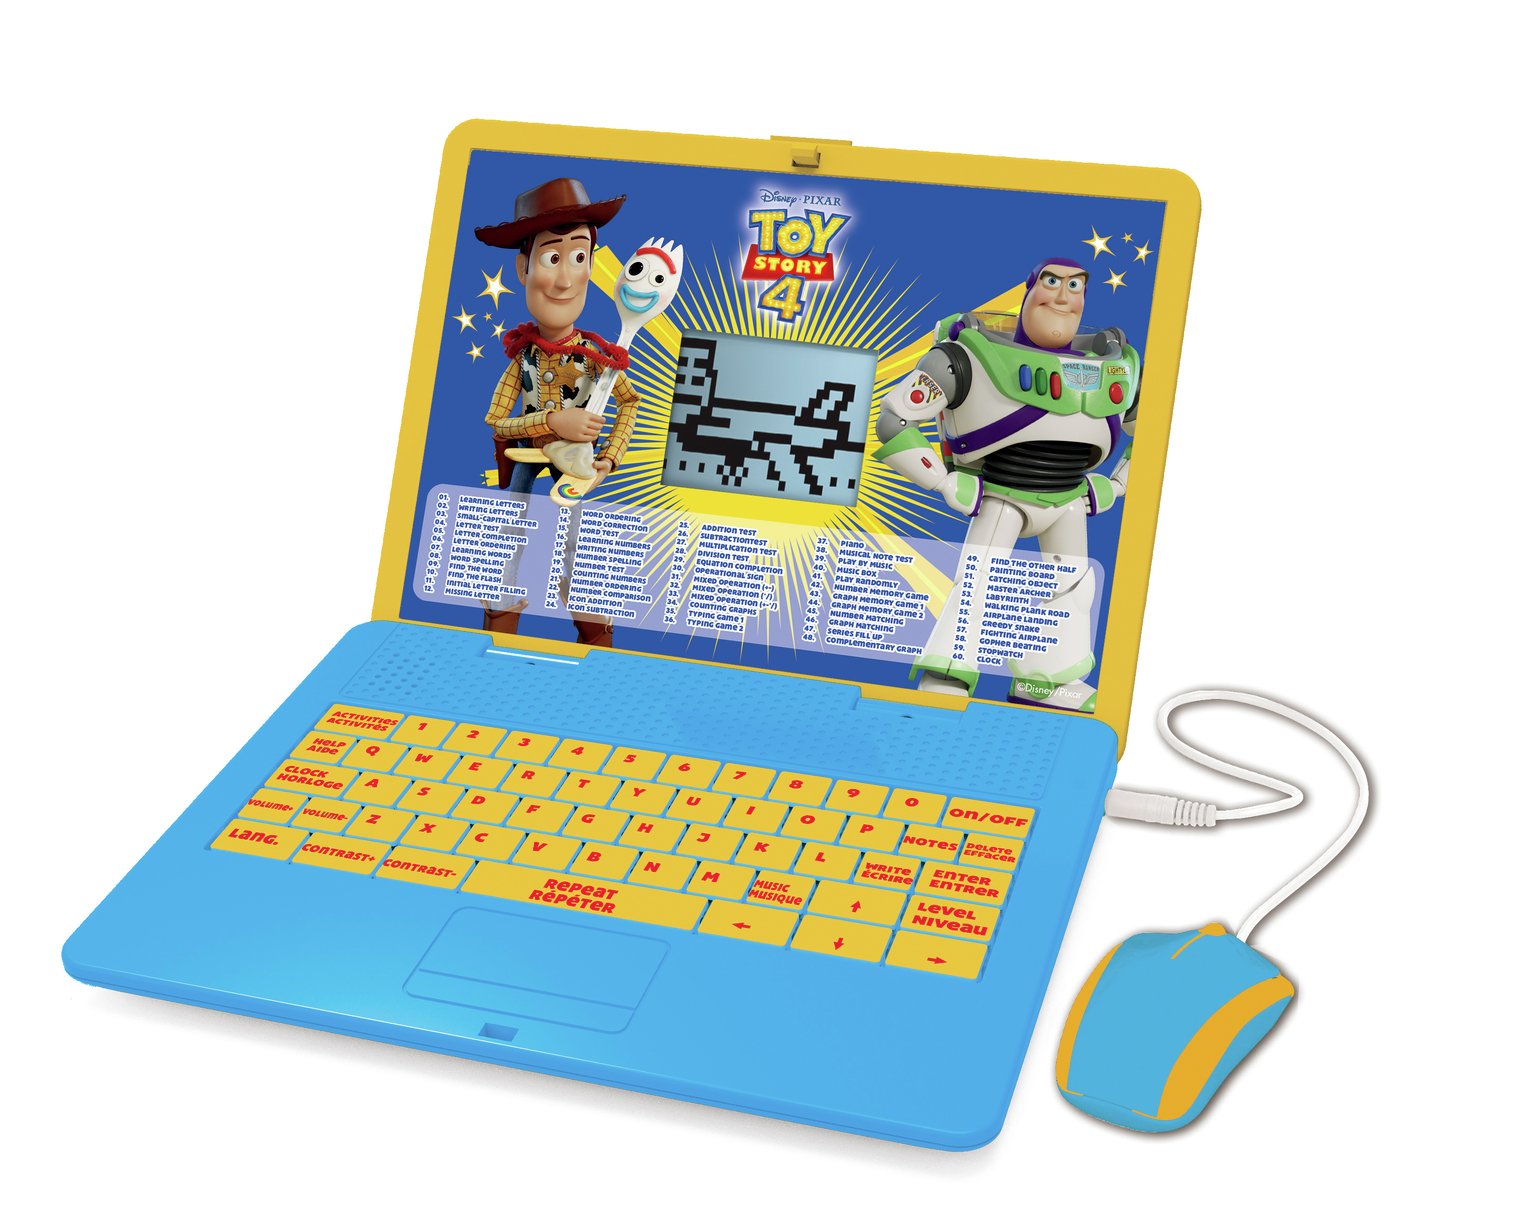 Toy Story Educational Bilingual Interactive Learning Tablet